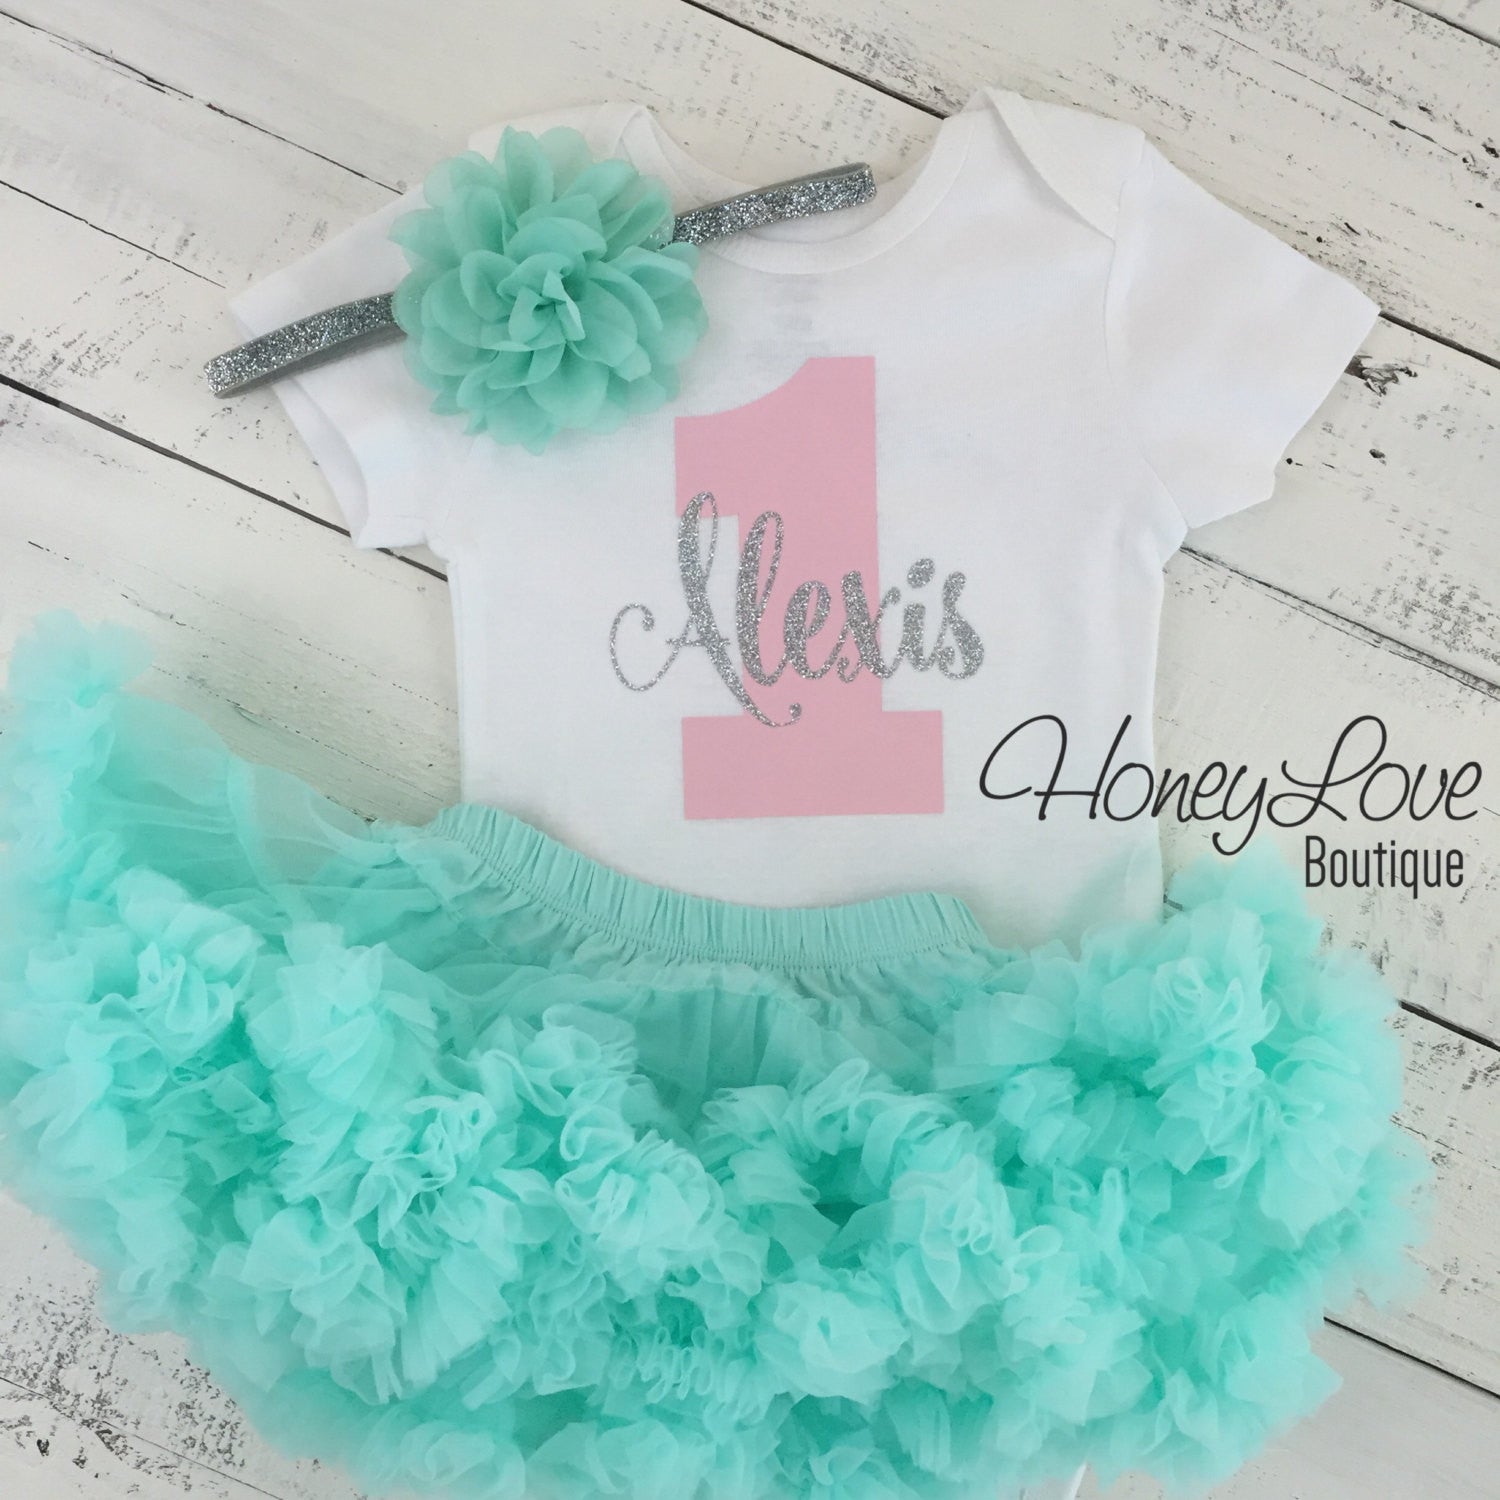 personalized first birthday outfit